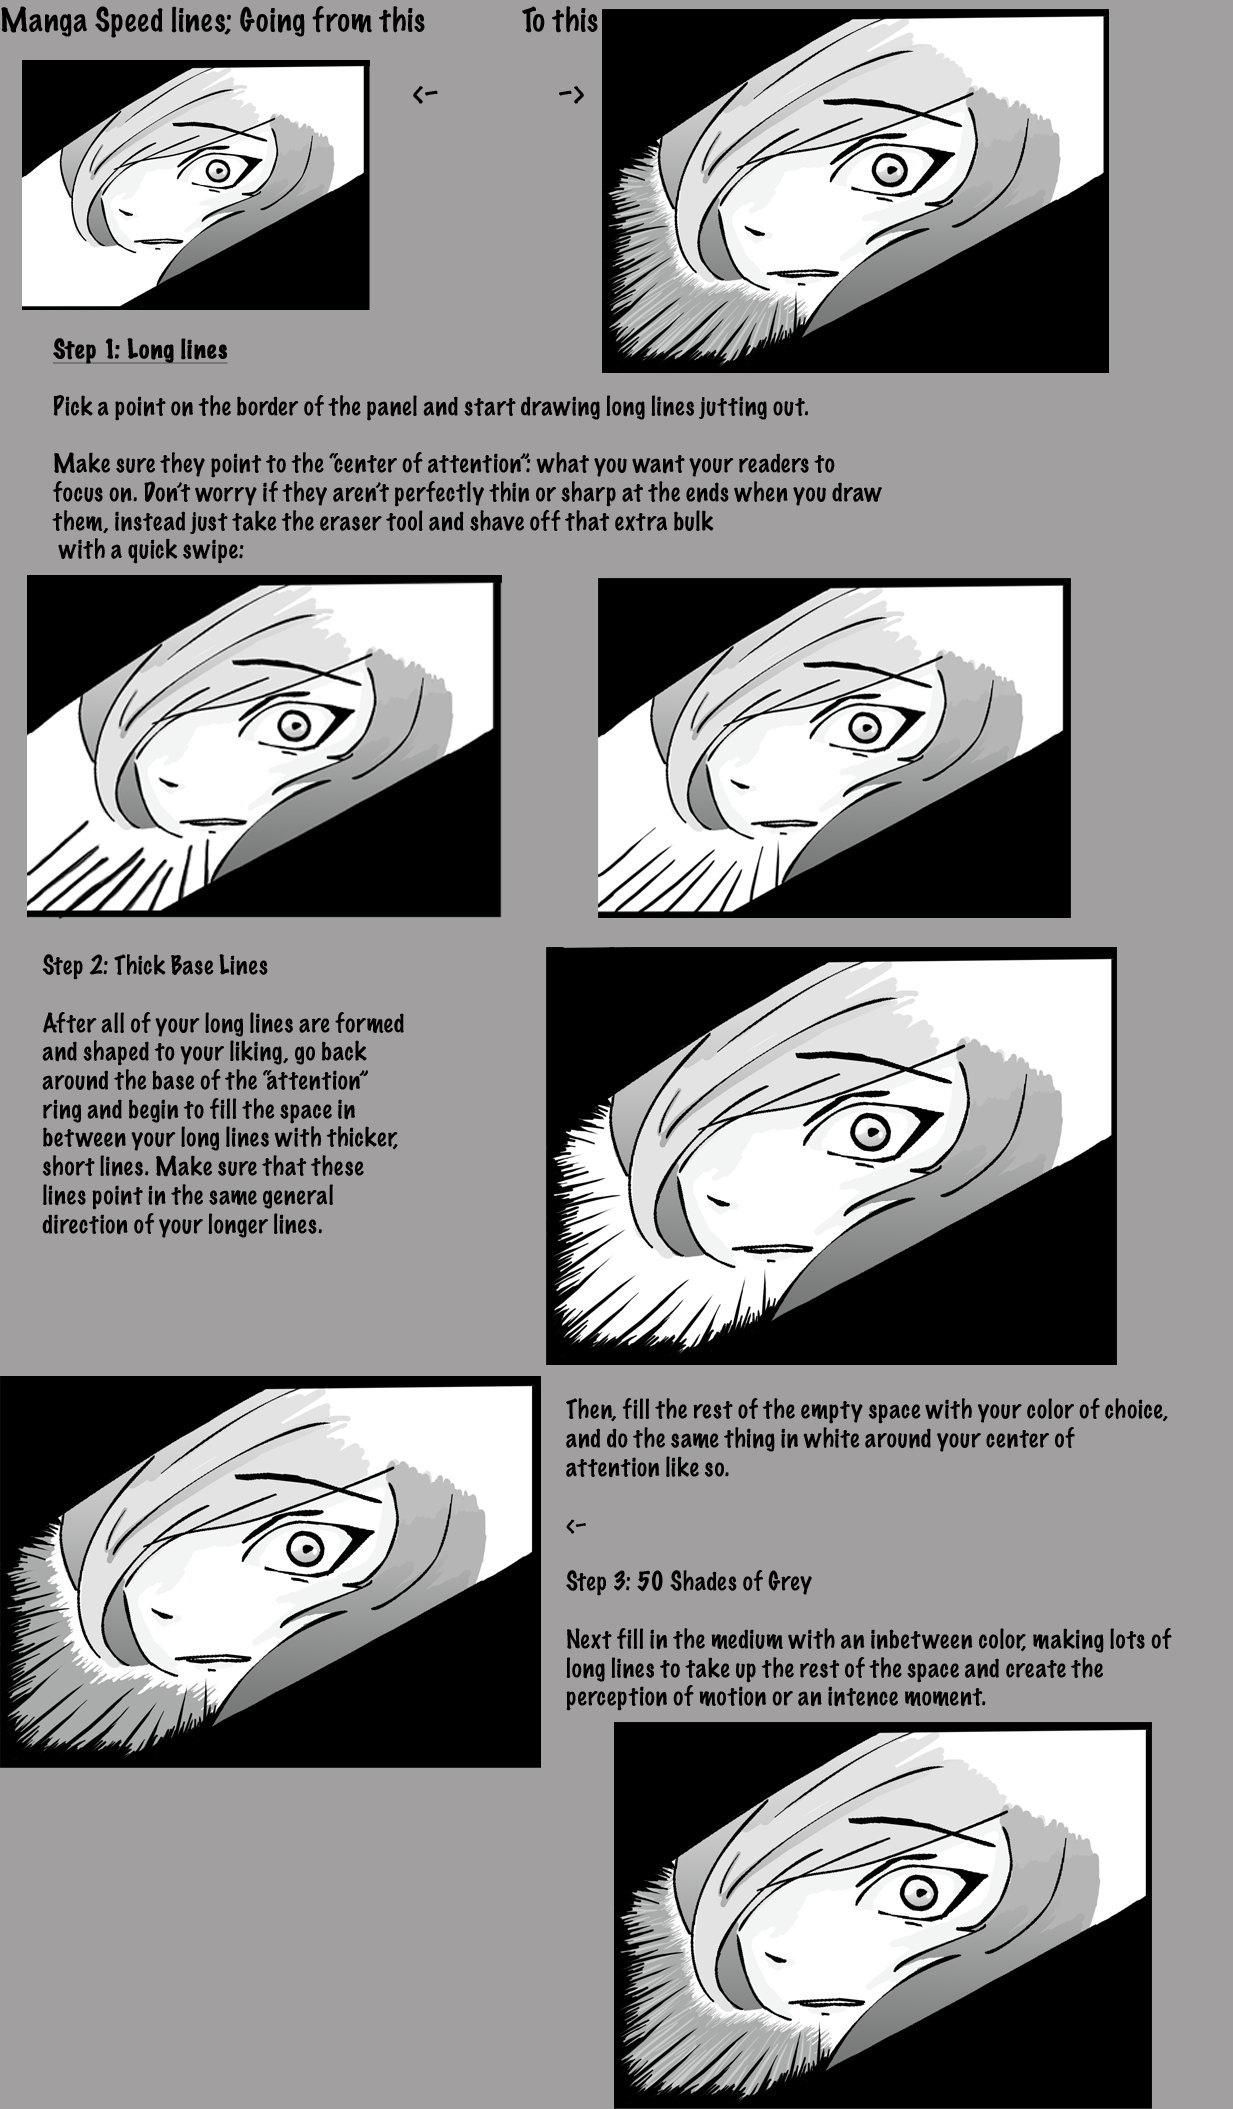 How to Draw Manga Speed Lines by SpectralEternity on DeviantArt